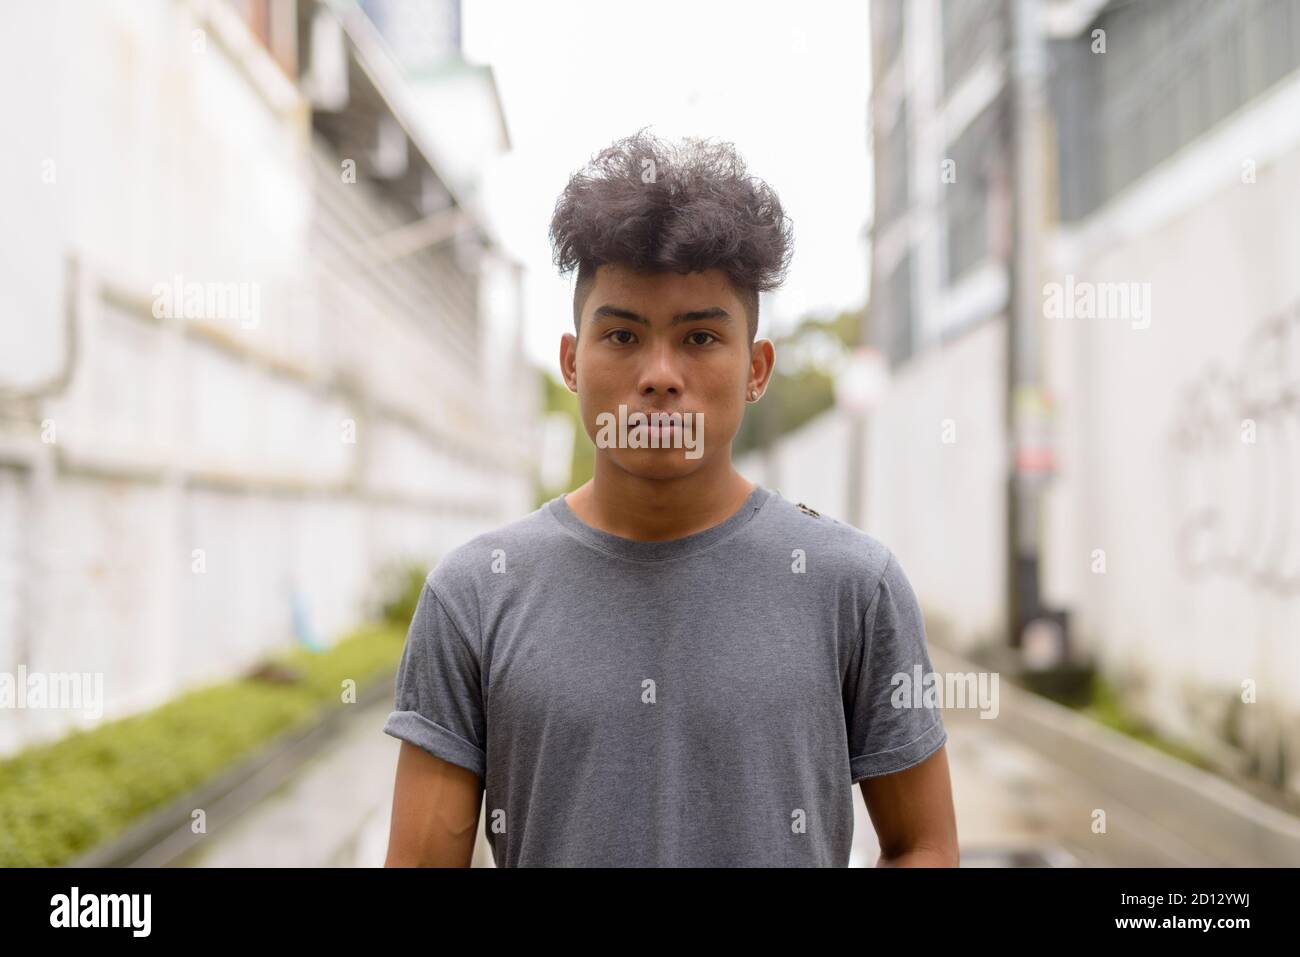 Young Asian man with curly hair in the streets outdoors Stock Photo